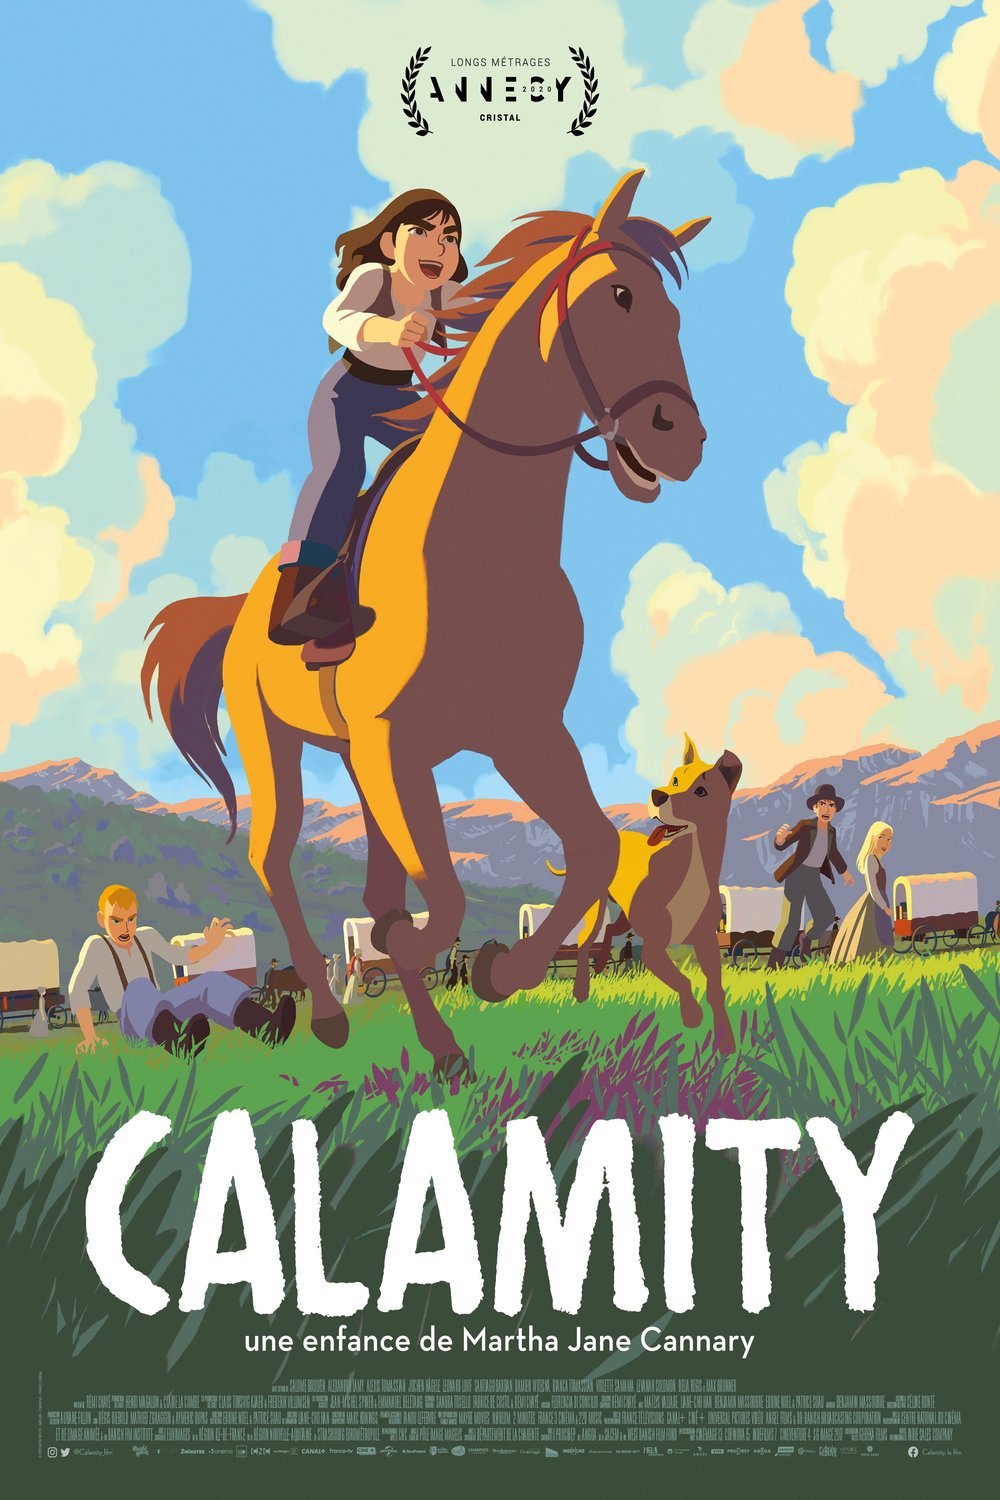 Poster of the movie Calamity, a Childhood of Martha Jane Cannary